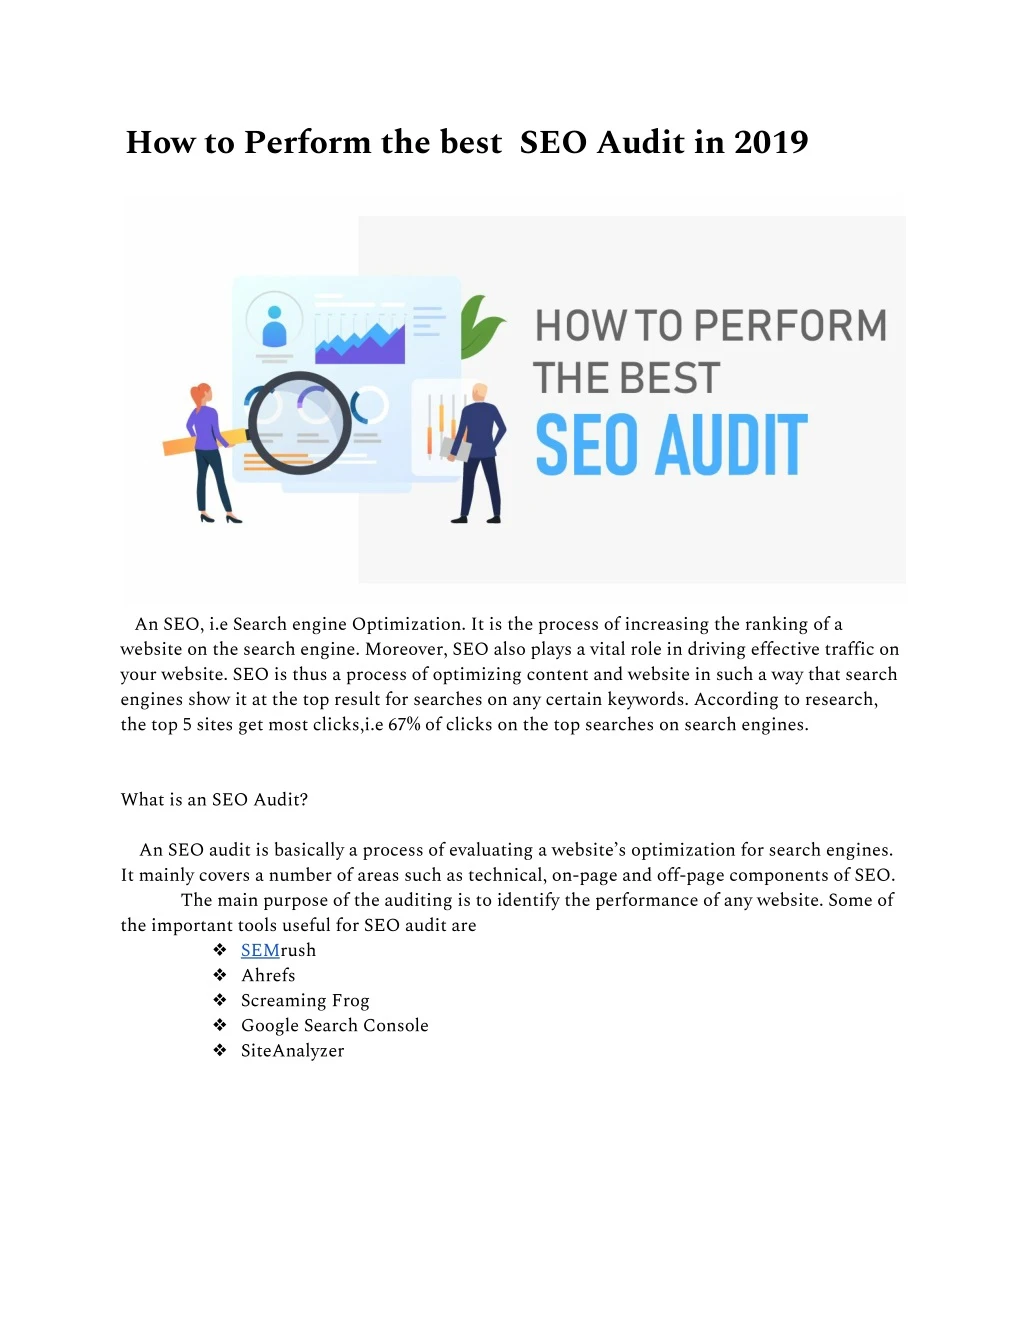 how to perform the best seo audit in 2019